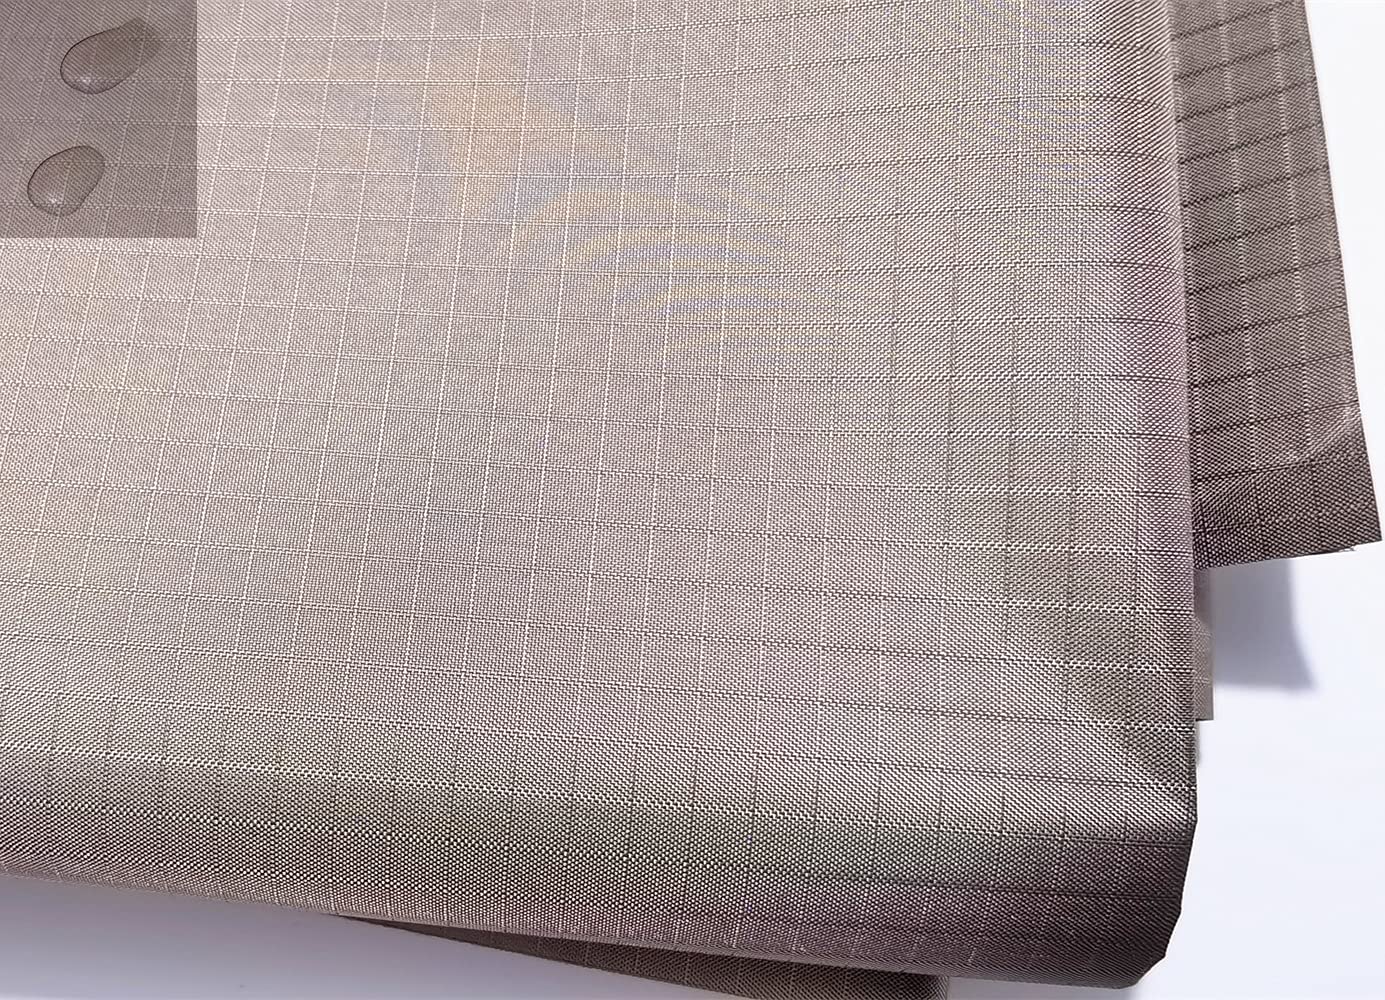 5G Radiation Shielding Military Grade EMF Blocking Fabric-Electromagnetic Prevention Effectiveness Waterproof for Indoor and Outdoor by 1 Meter Long